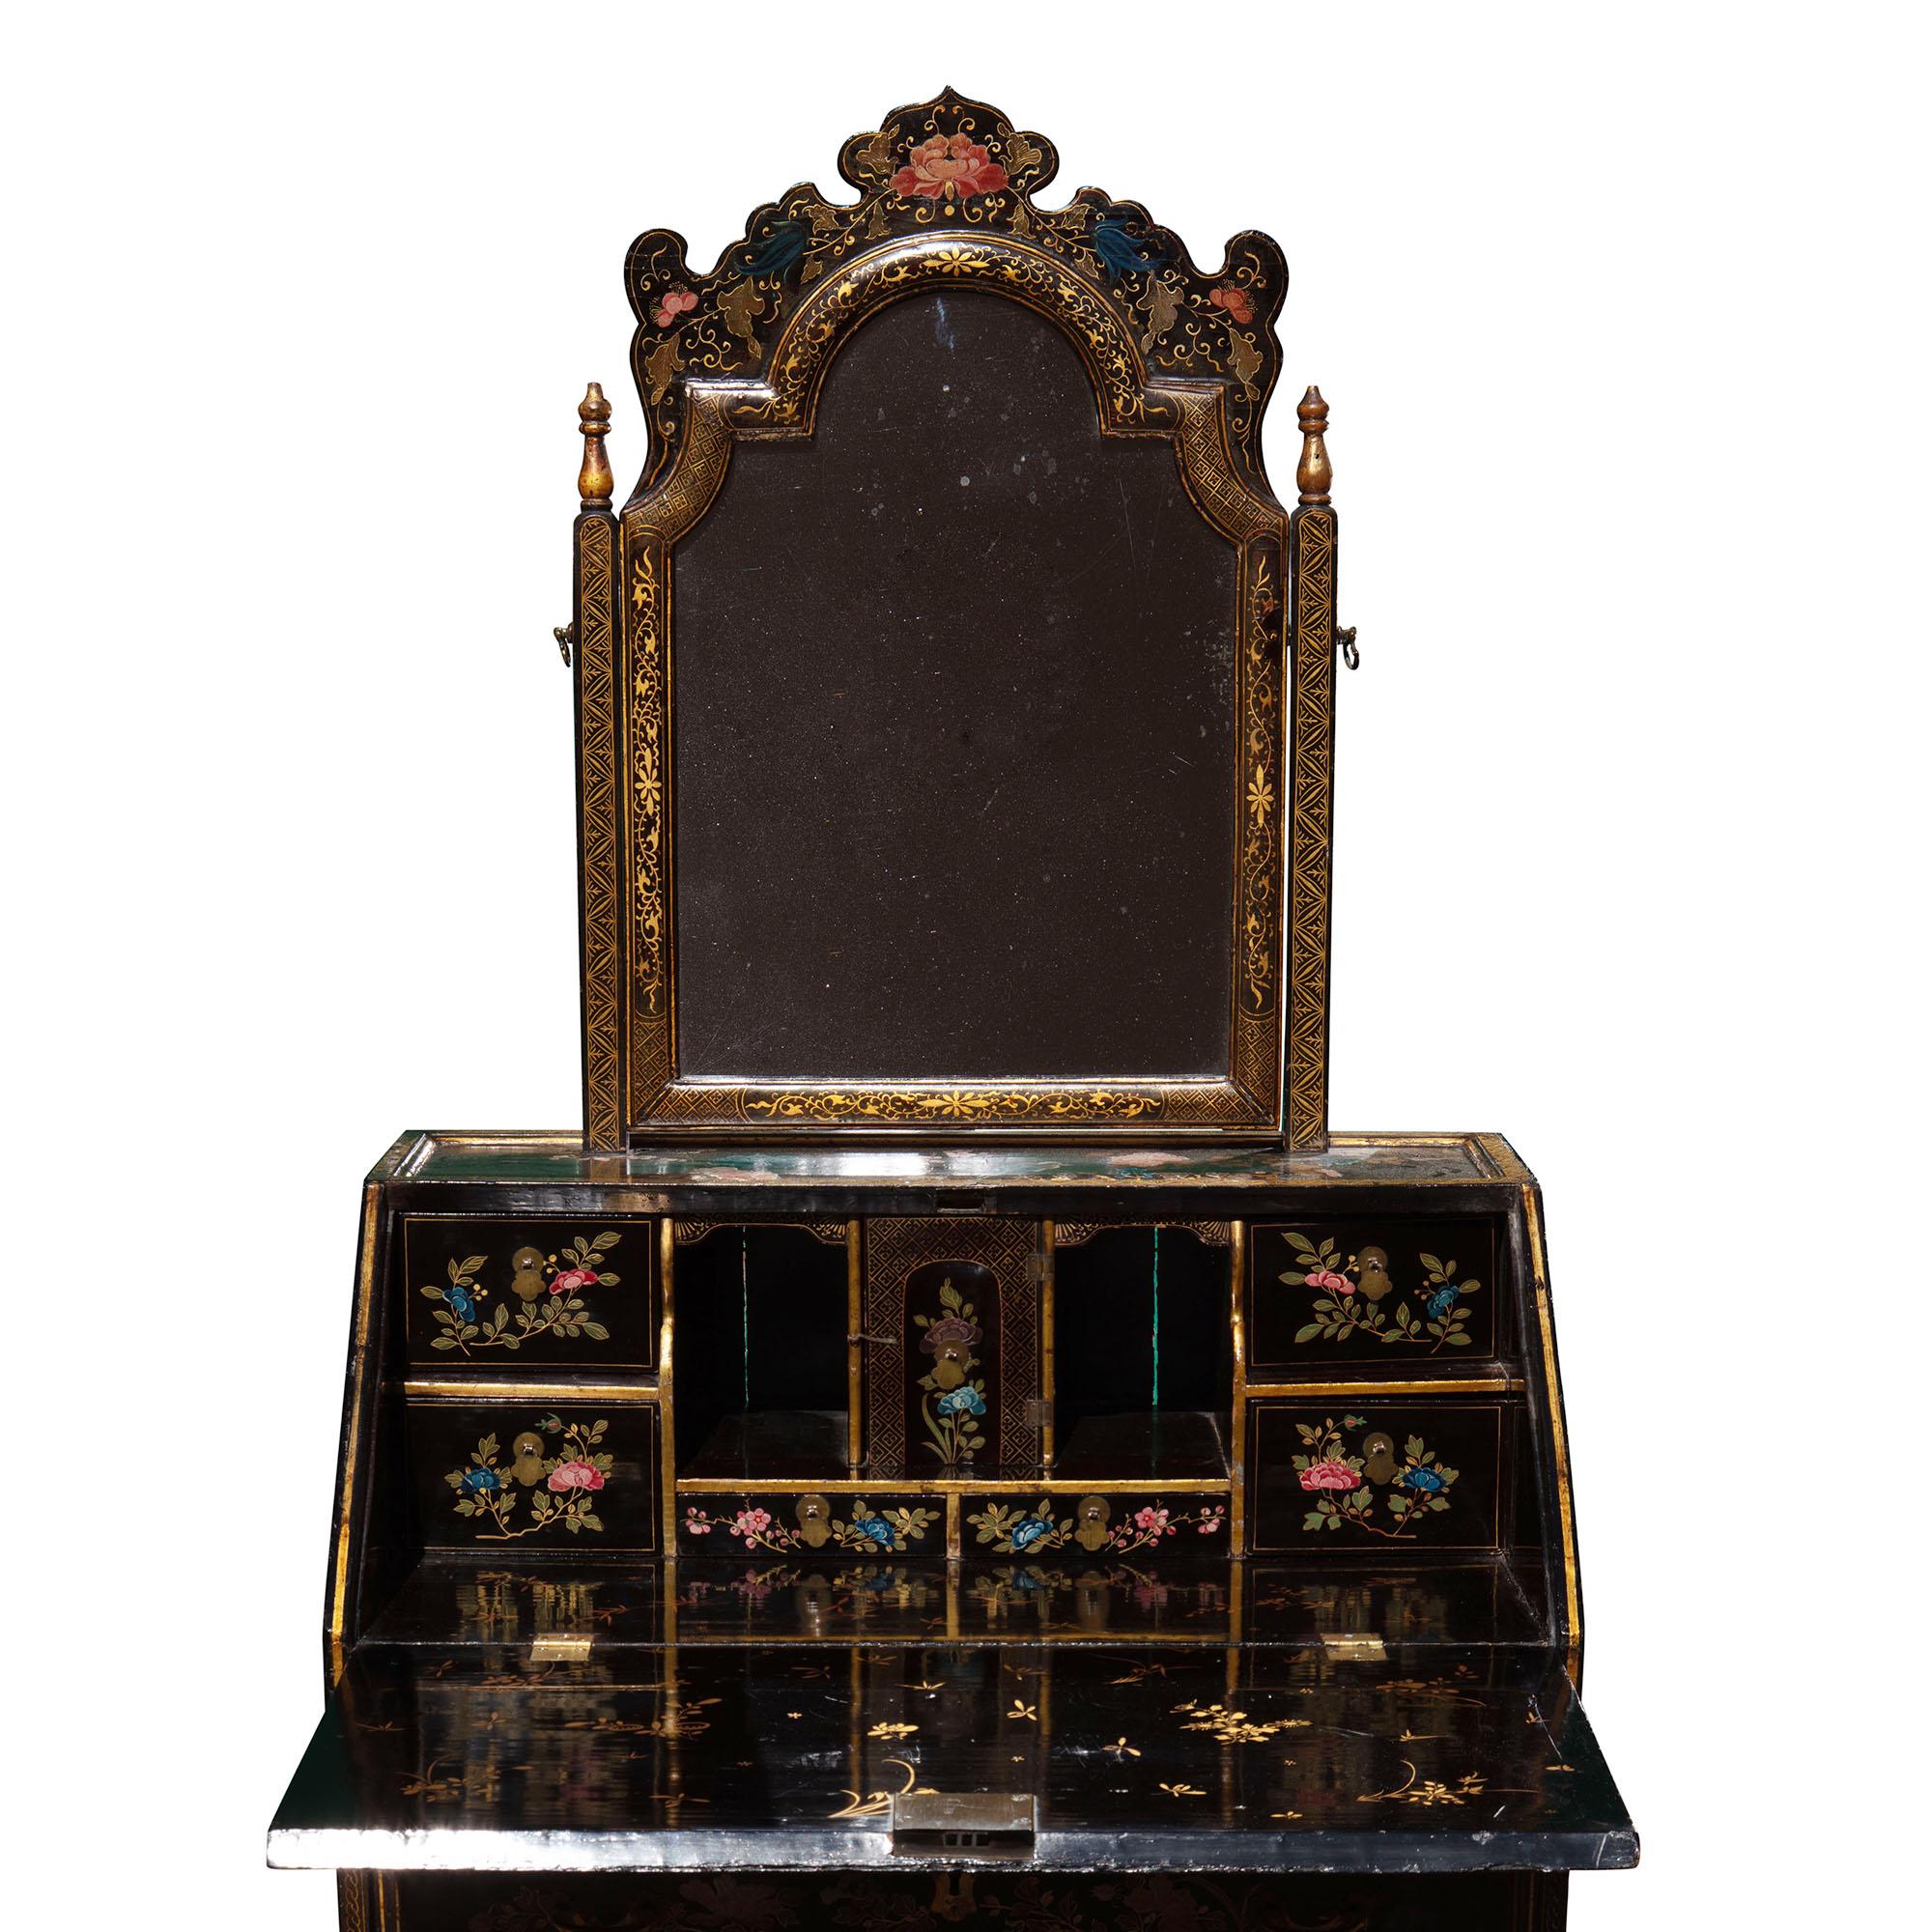 A Chinese export lacquer bureau on stand decorated with an unusual polychrome flower design

This Chinese lacquer bureau on stand was made in China in the mid-18th century, circa 1750

Its design comes from Western prototypes and adapted in the